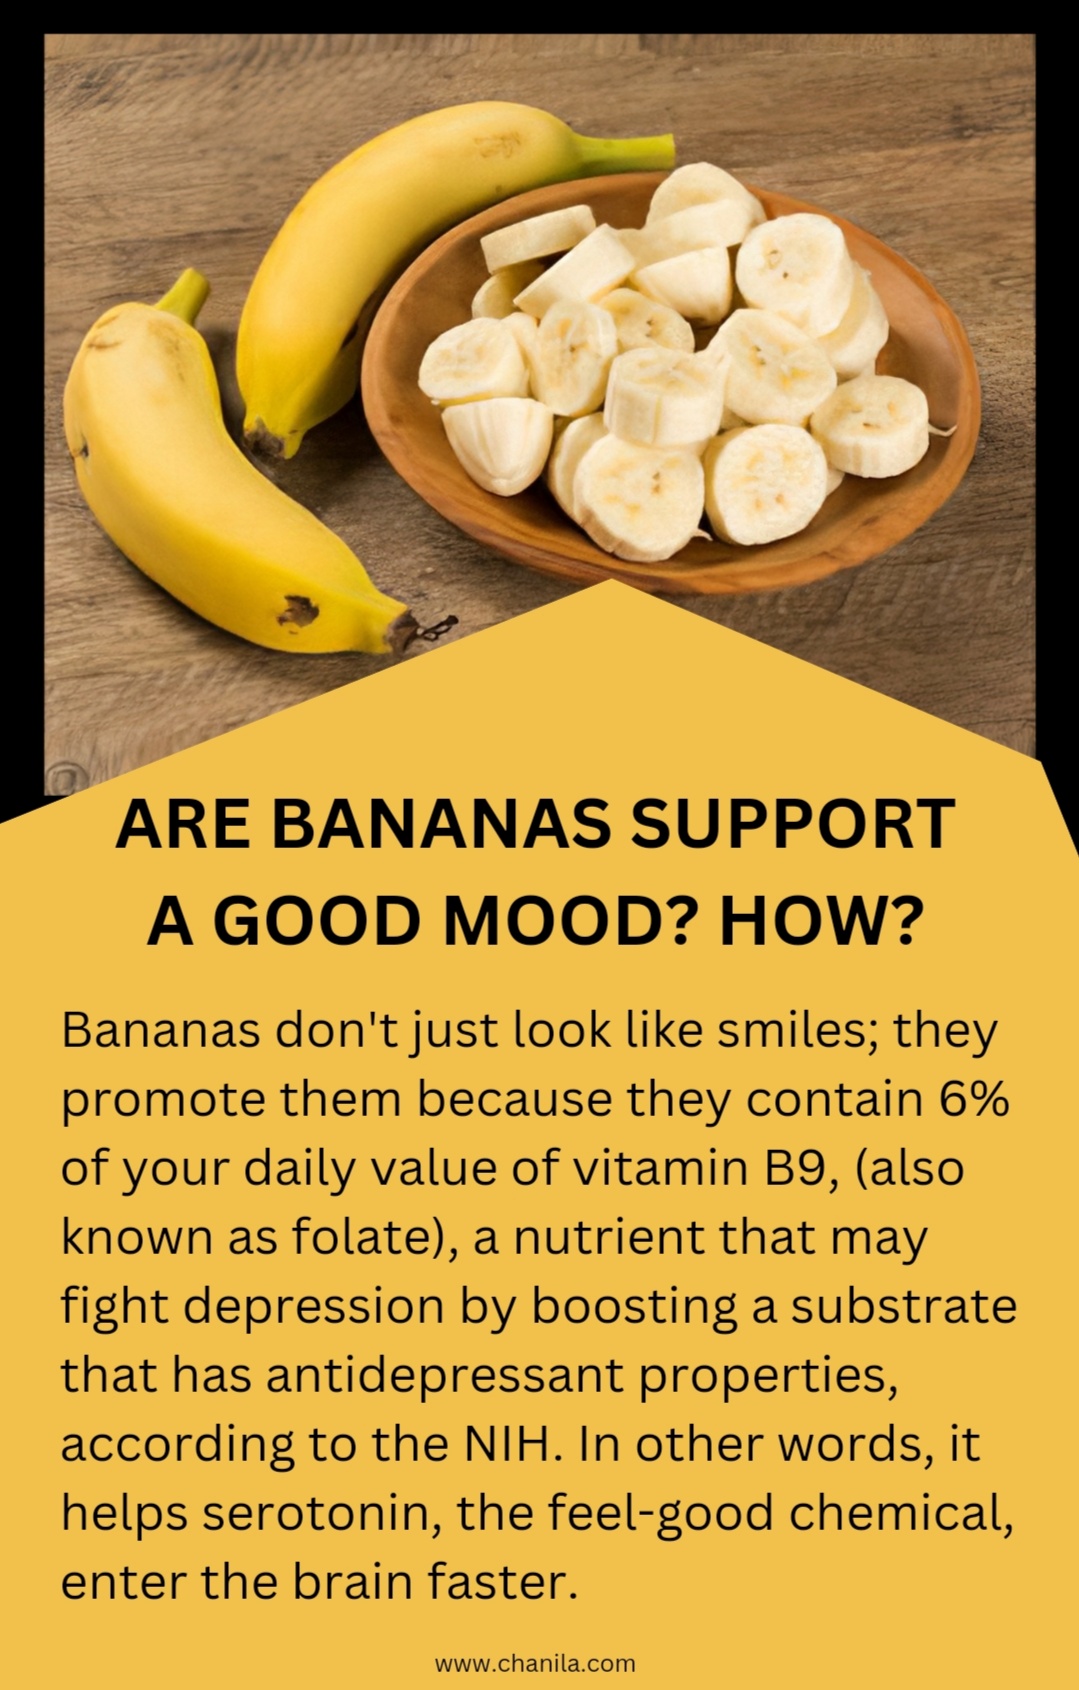 Are bananas support a good mood? How?